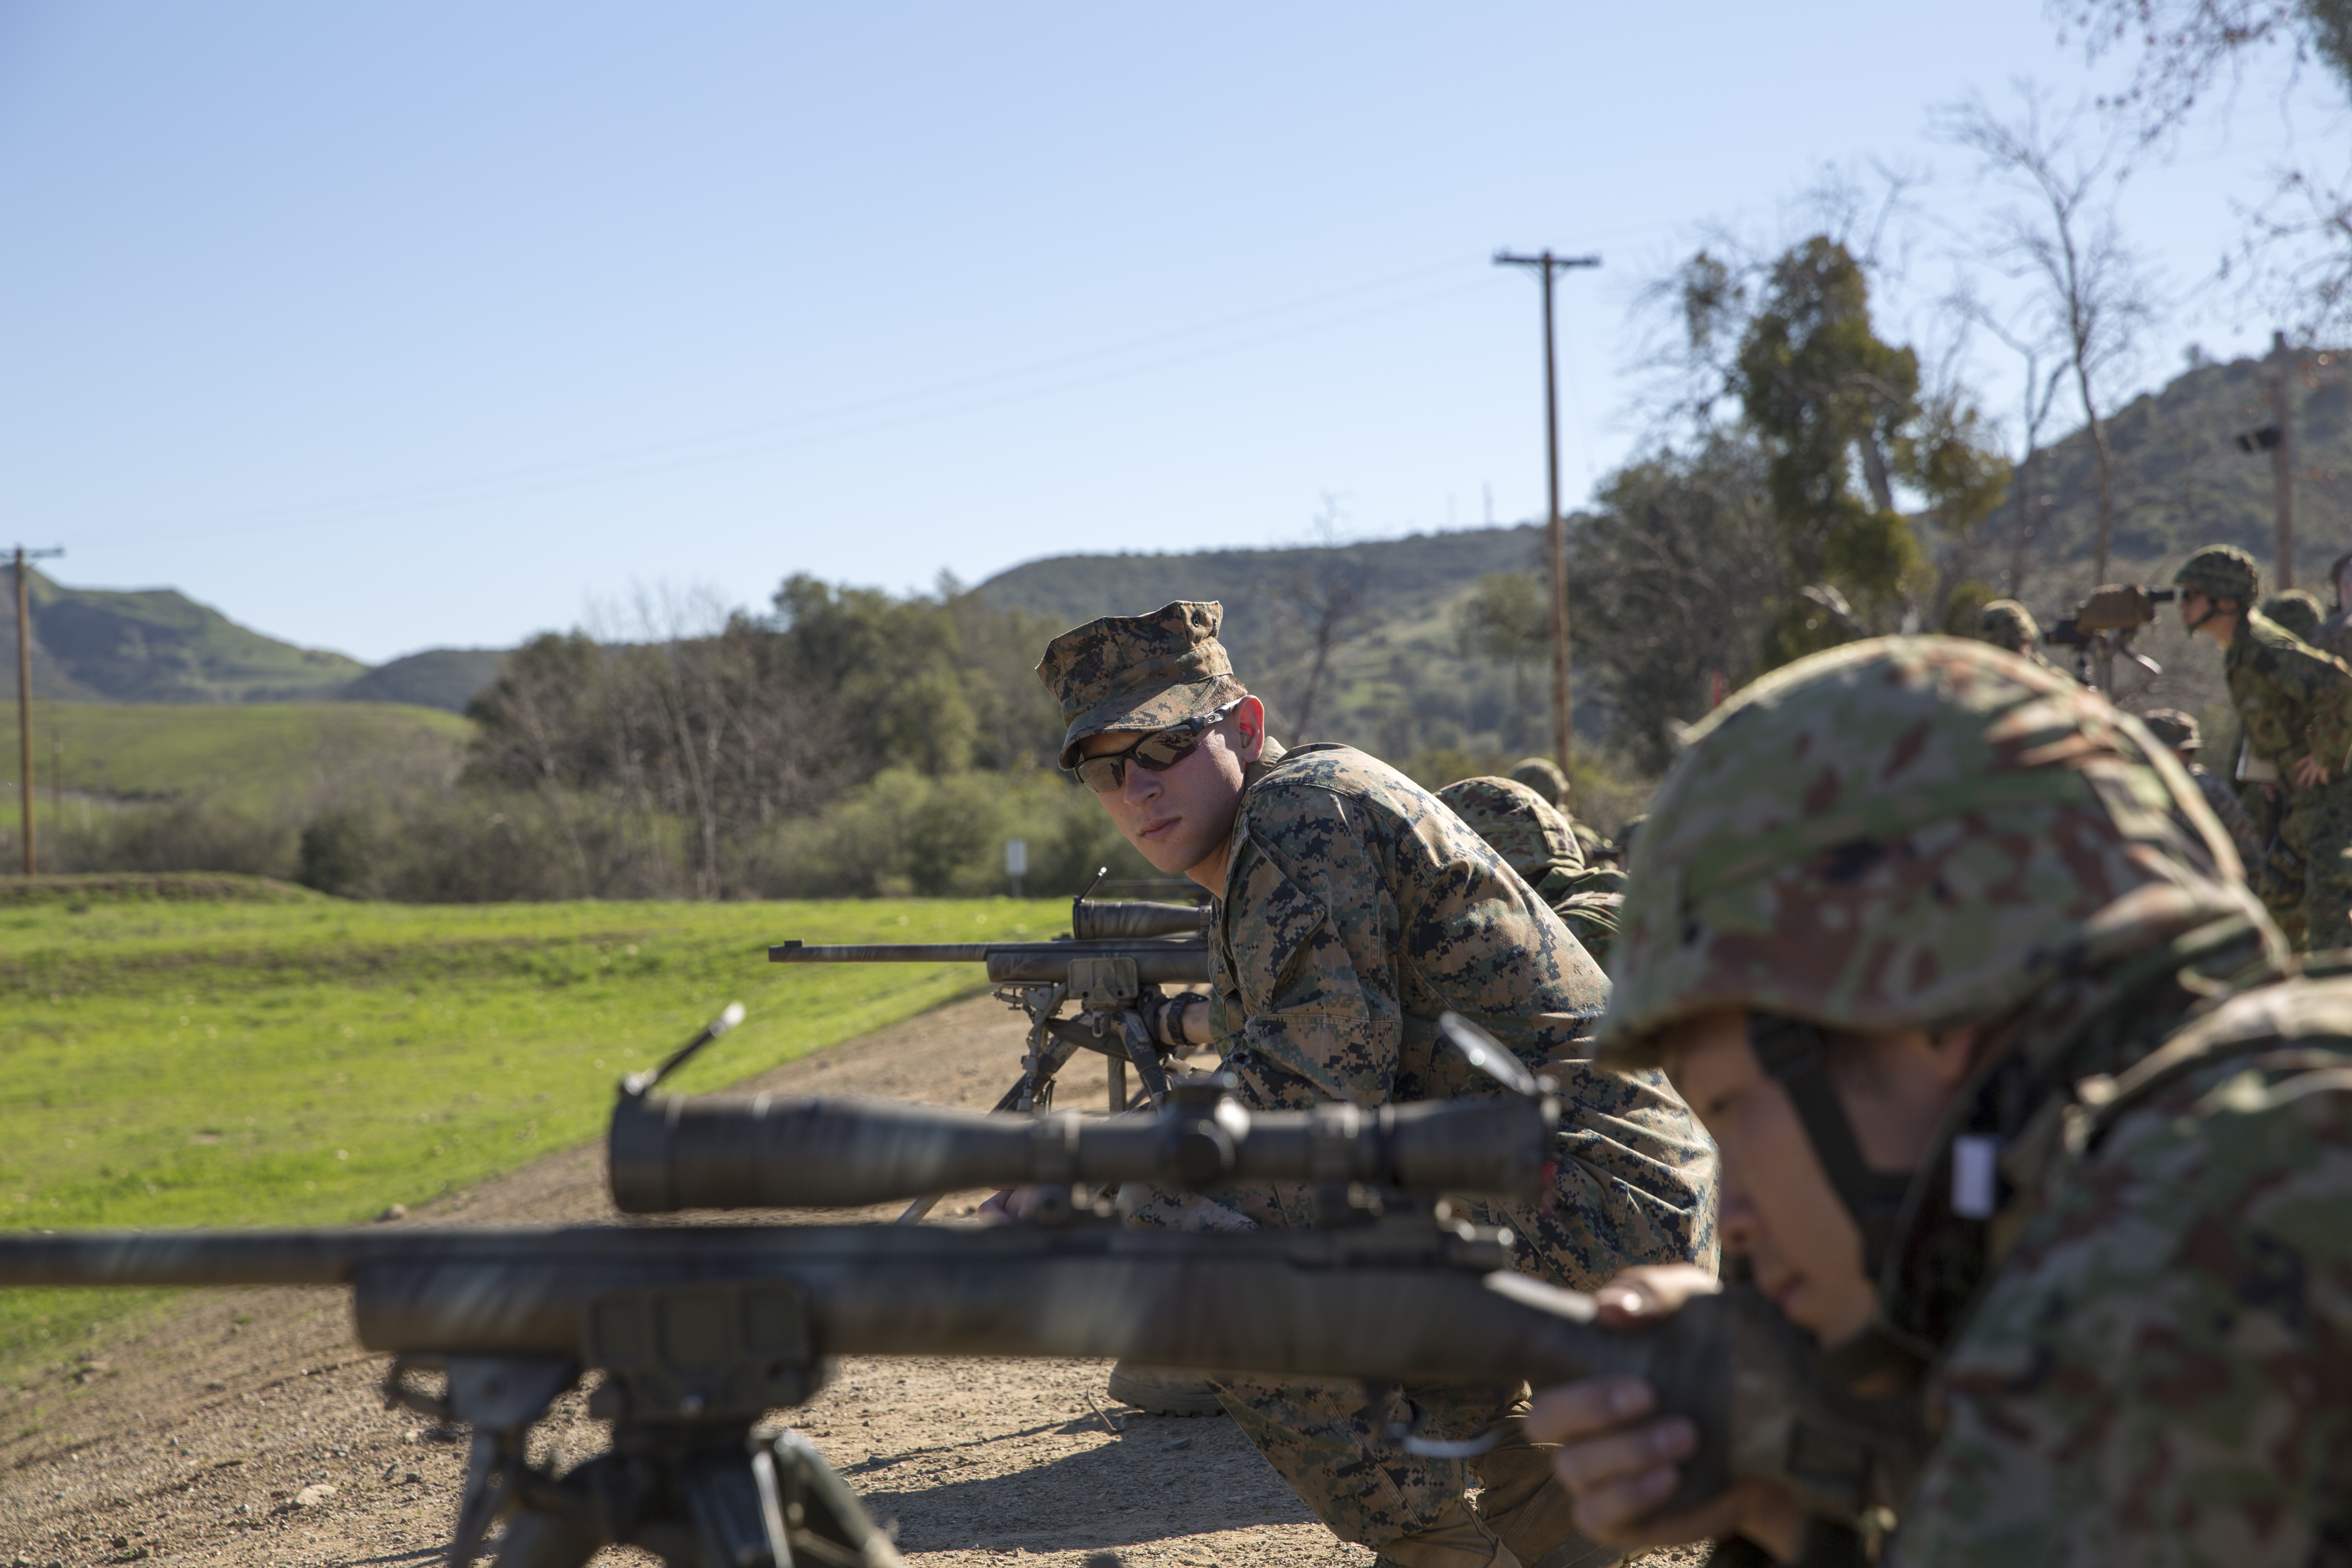 U.S. Marine Cpl. Ben Downing, mortarman with Scout Sniper Platoon, Weapons Company, 1st Battalion, 4th Marine Regiment, observes the shooting form of a Japan Ground Self-Defense Force soldier. US Marine Corps Photo